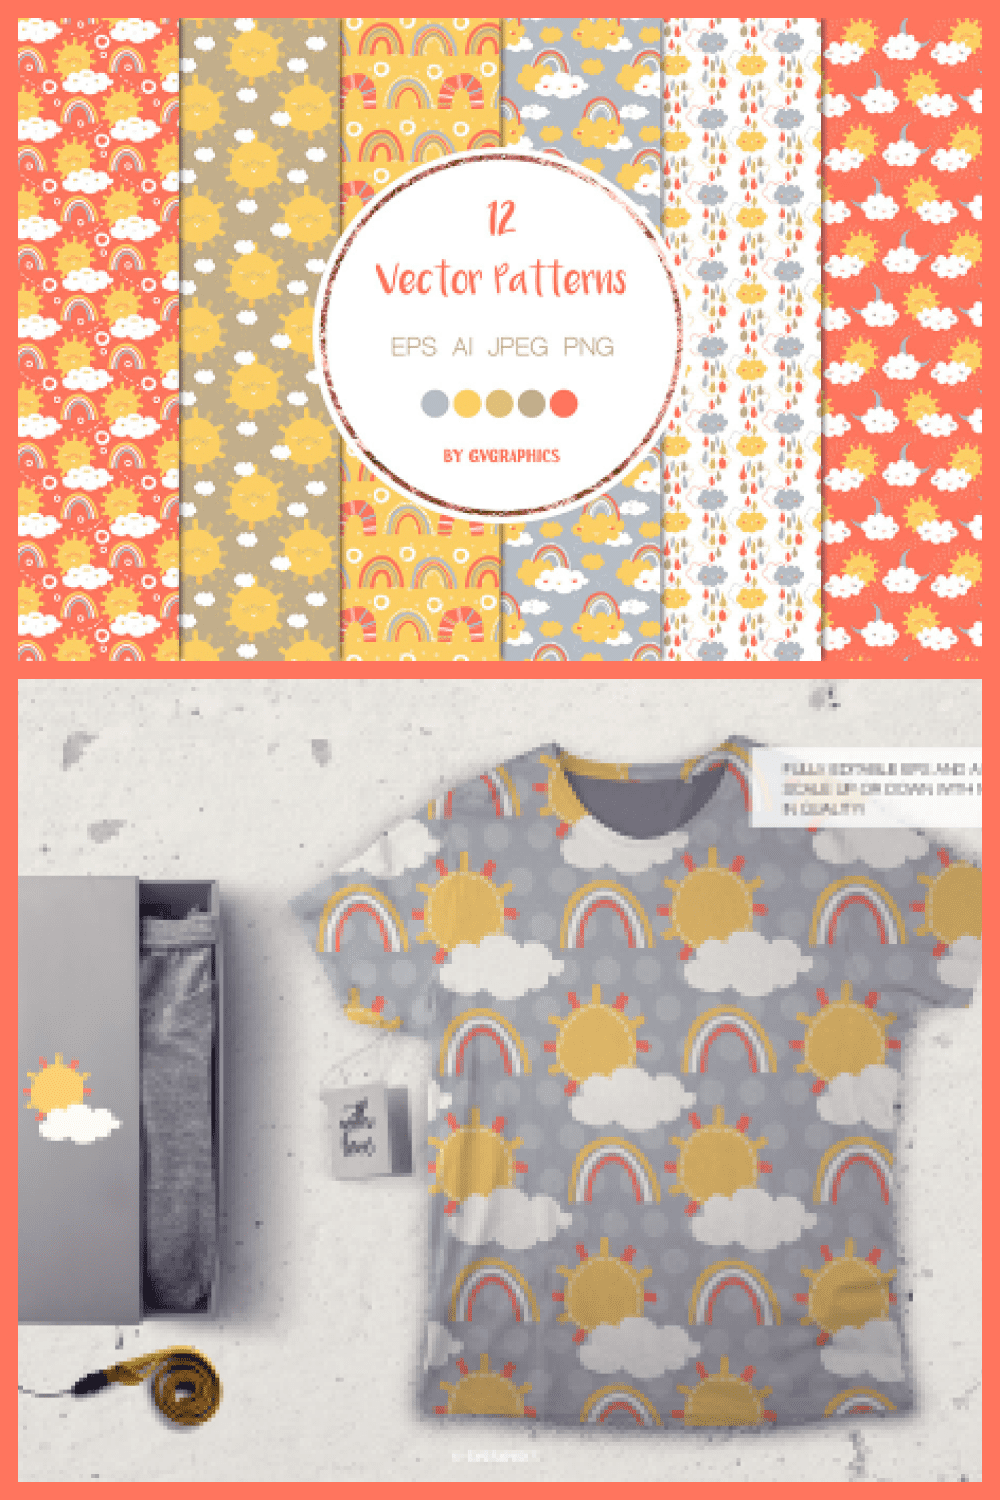 Sun, Clouds and Rain Vector Patterns and Seamless Tiles - MasterBundles - Pinterest Collage Image.